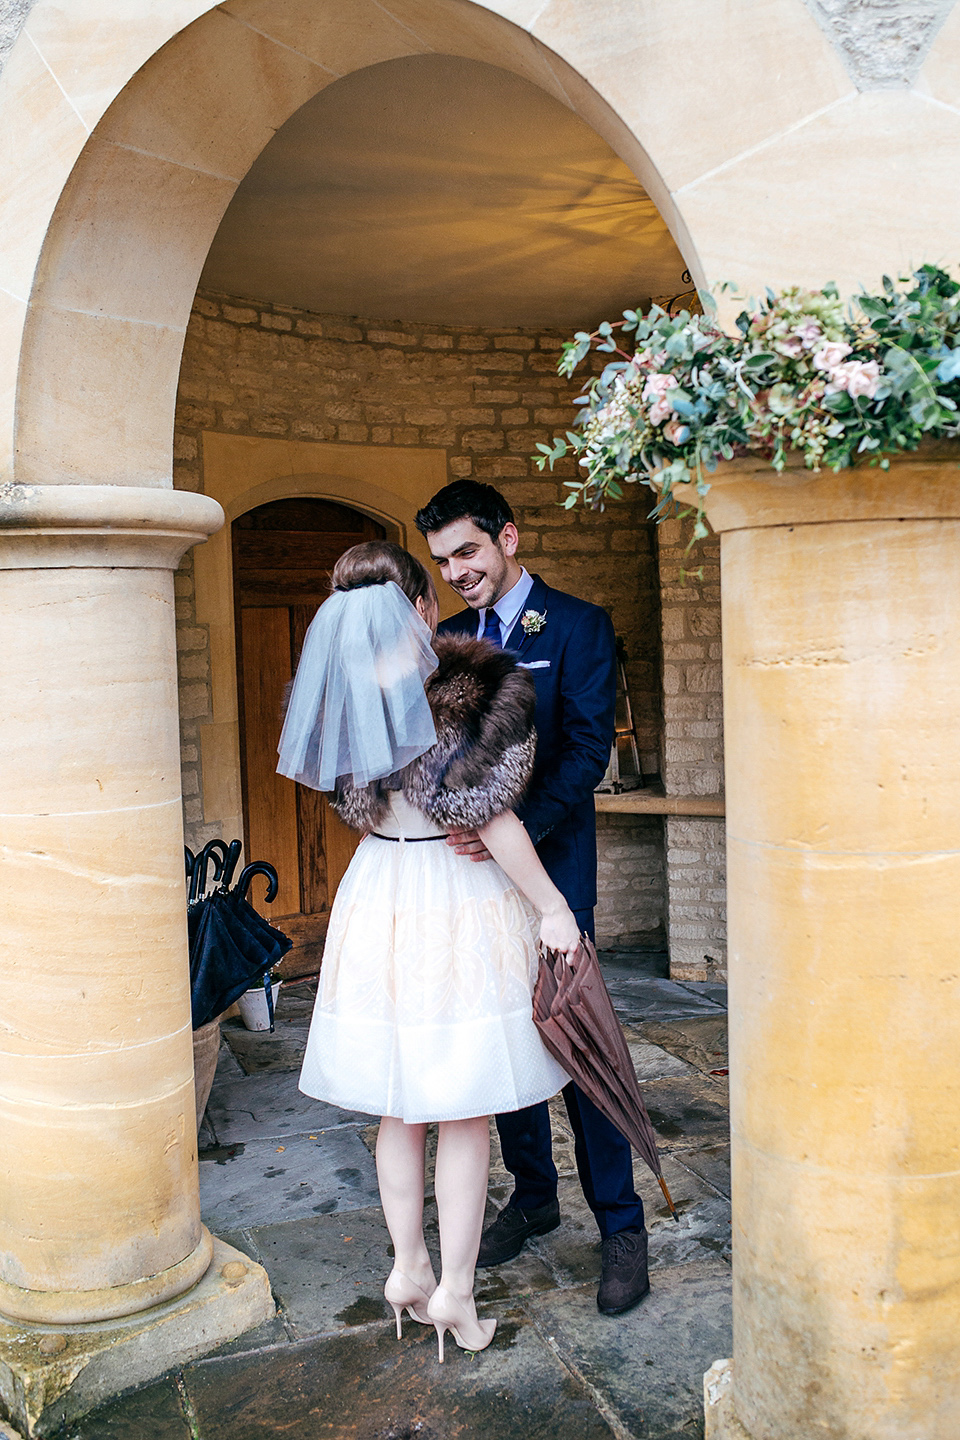 A short 60's inspired REDValentino dress for an Autumn wedding at Le Manoir Aux Quat'Saisons. Photography by Jordanna Marston.